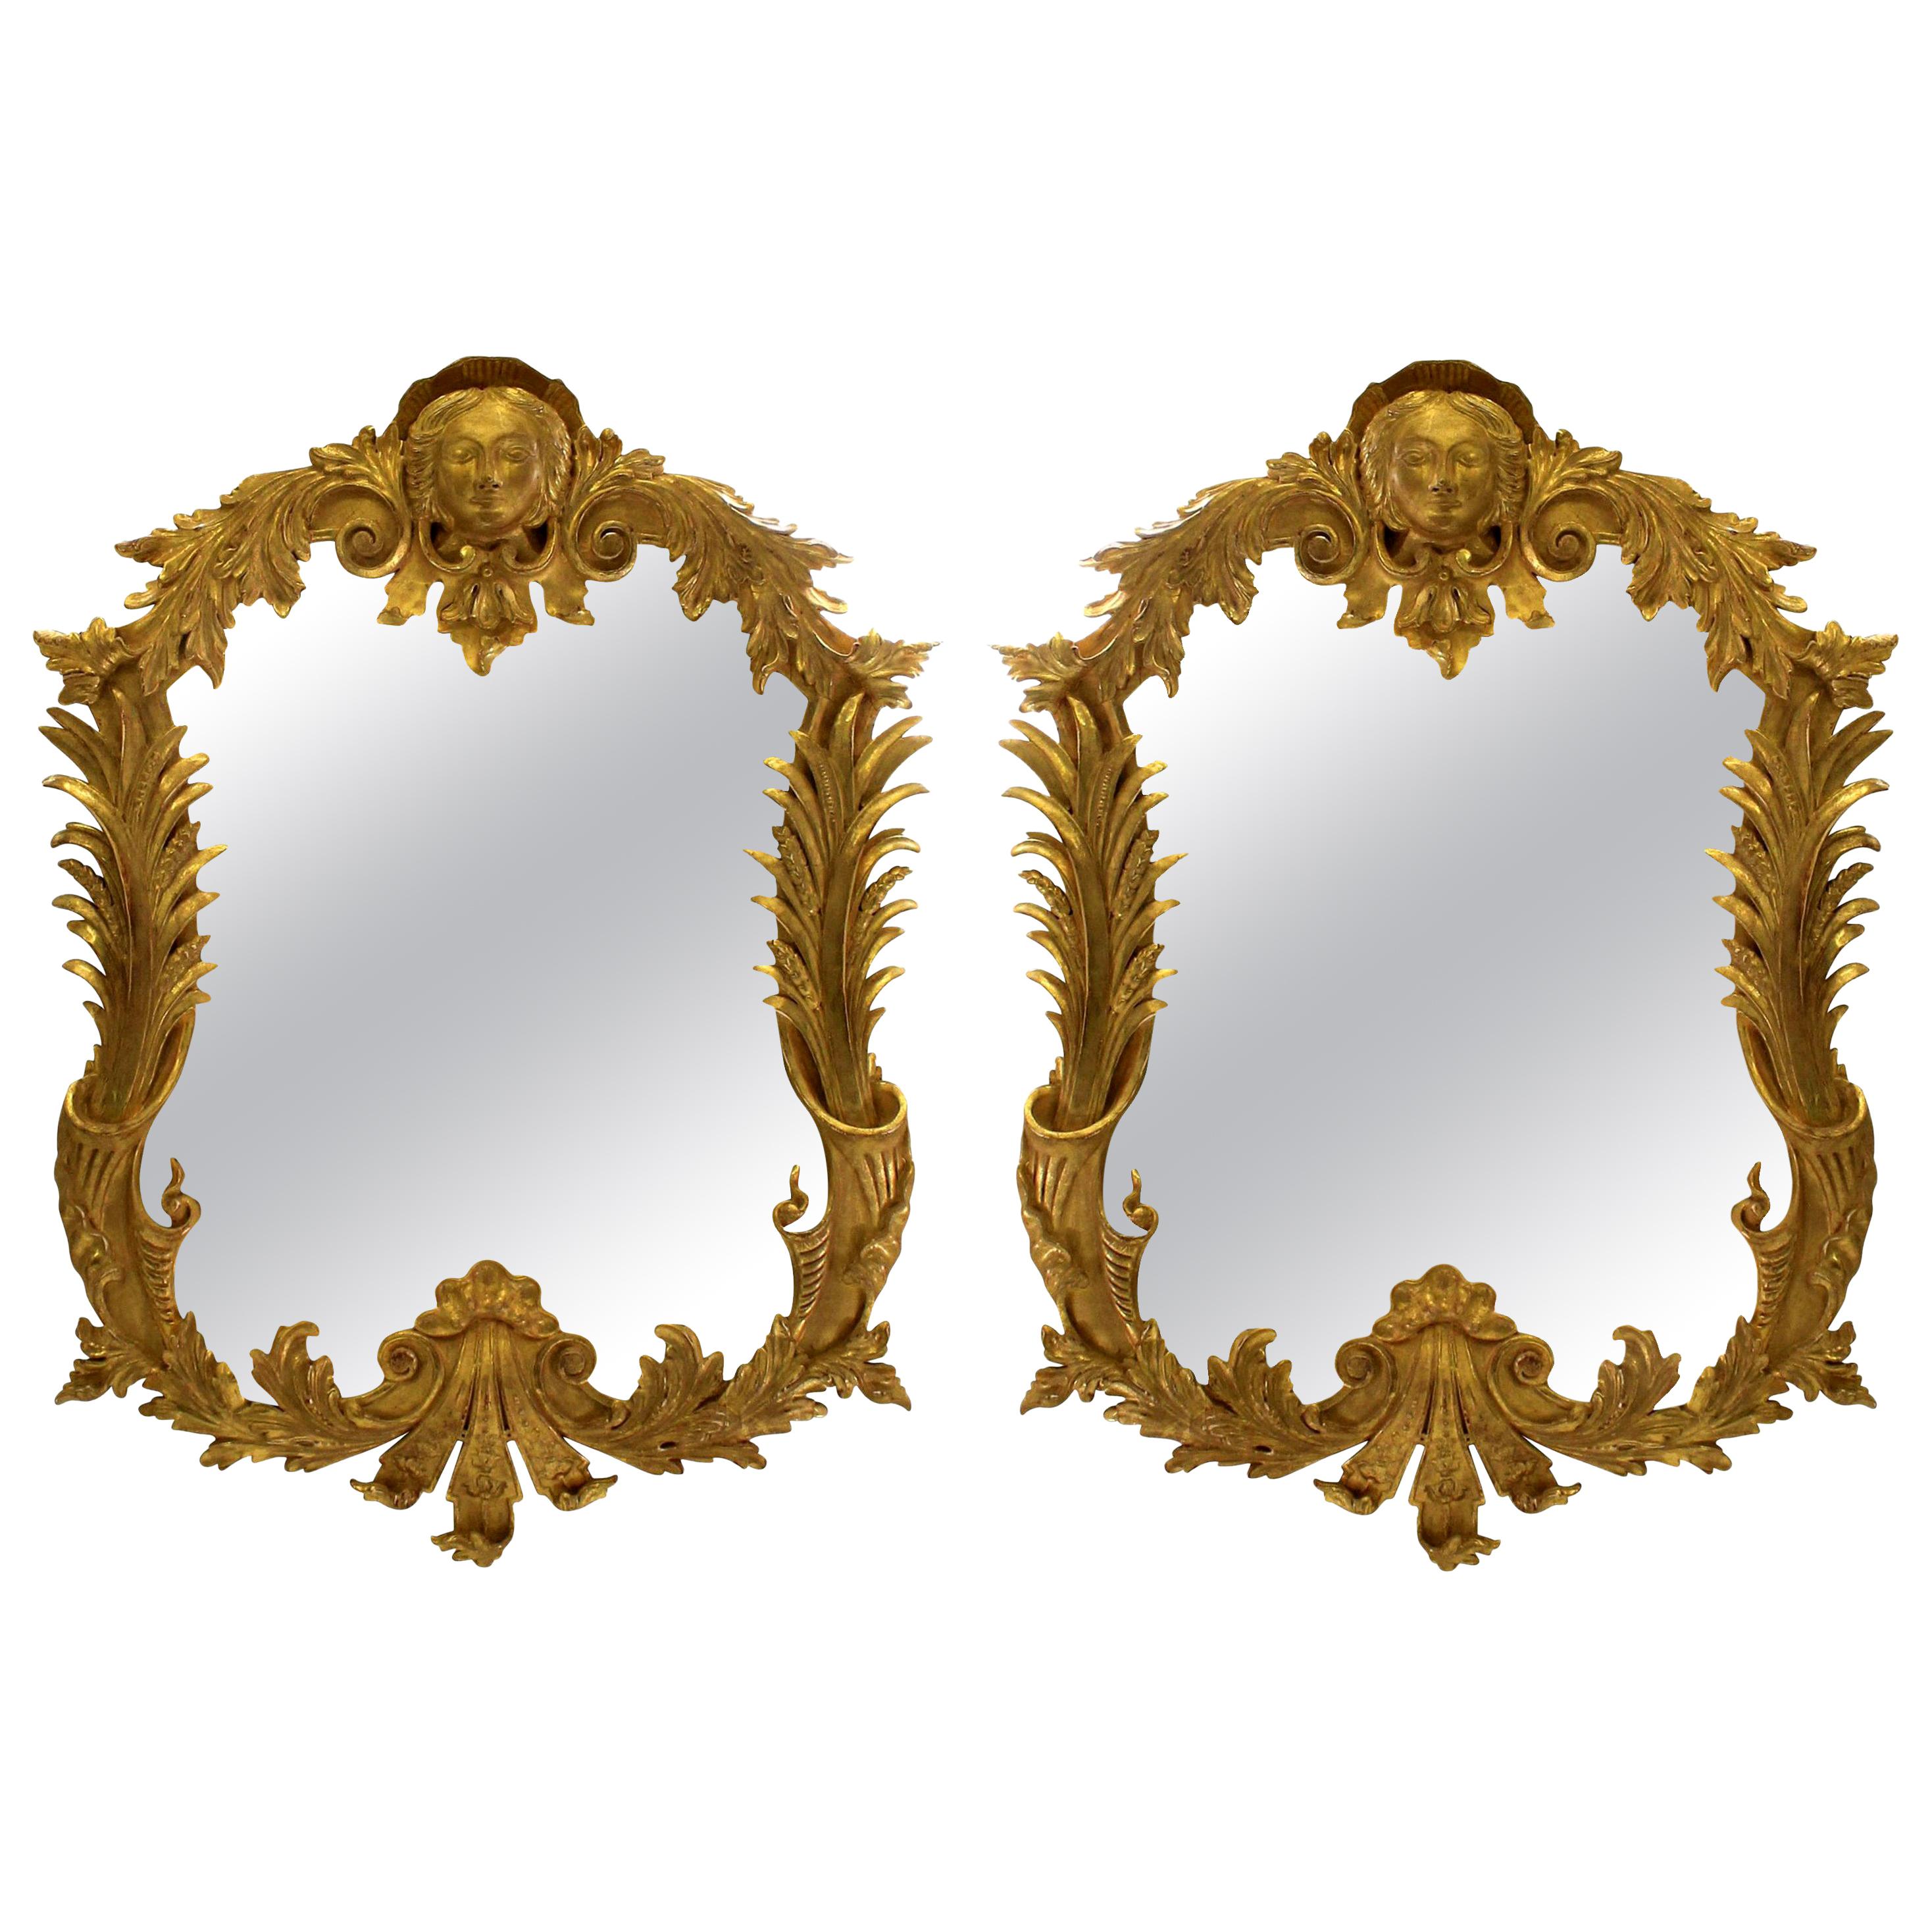 Pair of Large George III Style Giltwood Mirrors